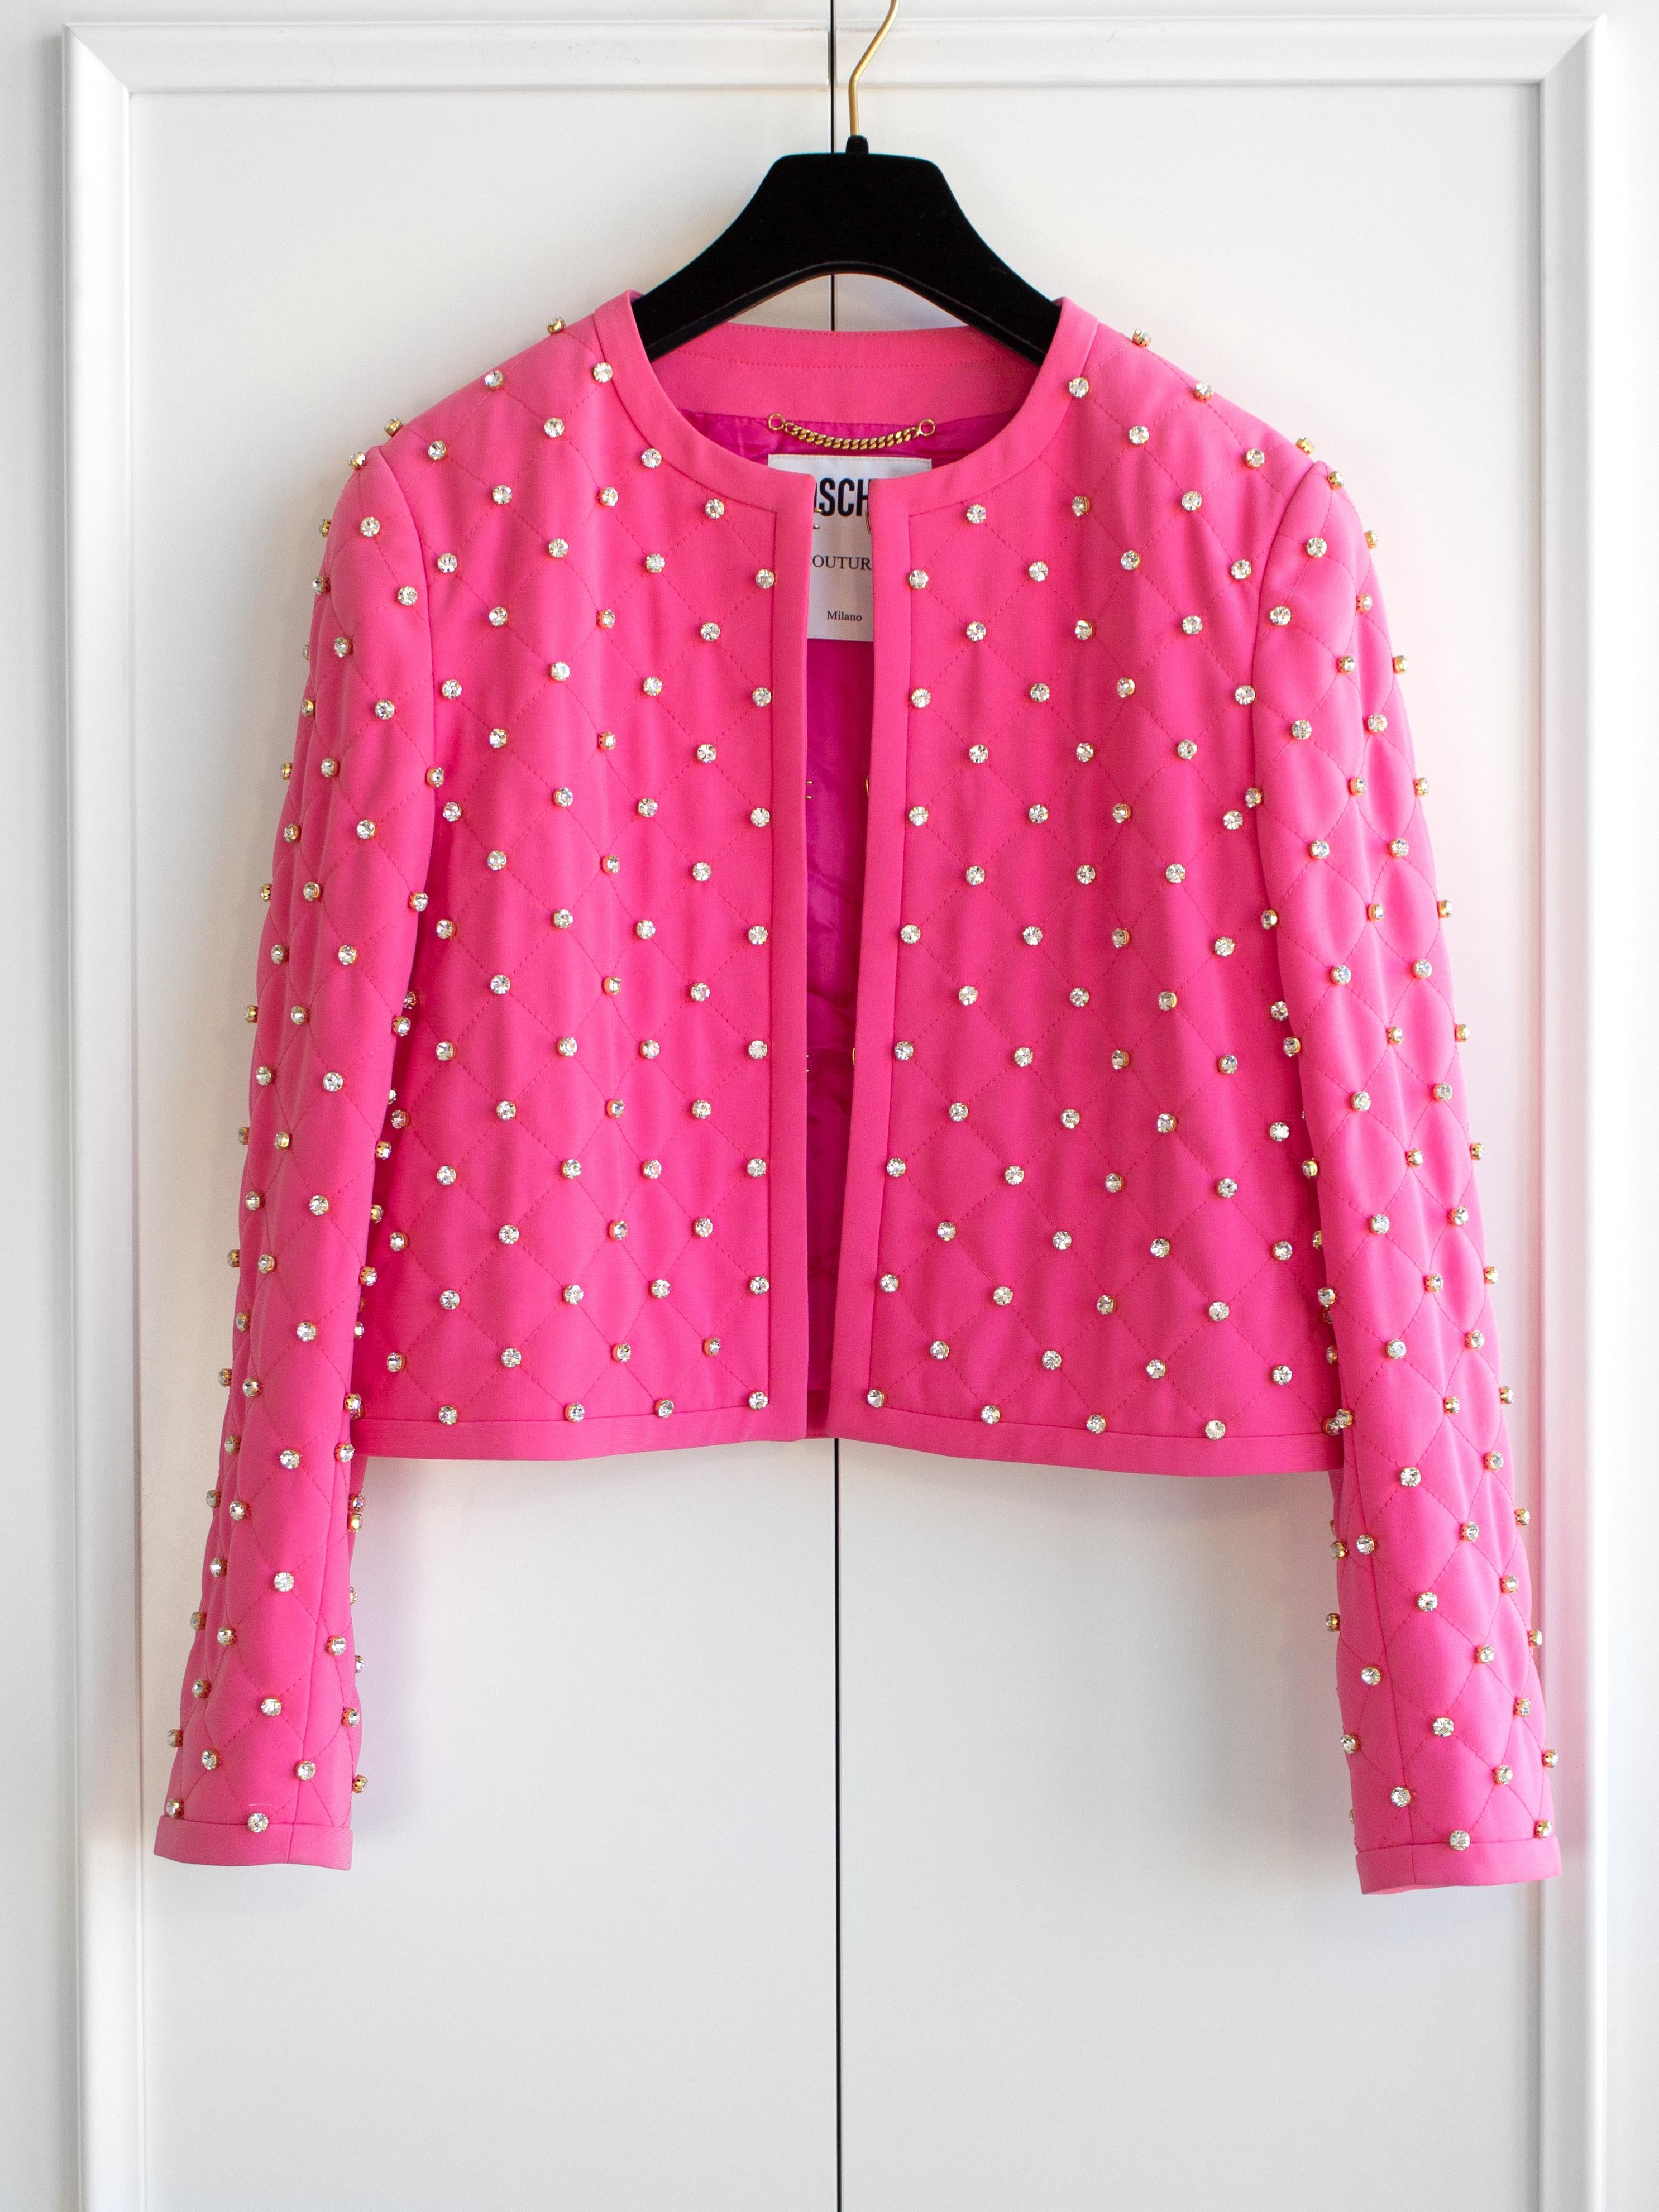 Moschino Couture S/S 2015 Barbie Crystal Embellished Rhinestone Pink Jacket For Sale 1